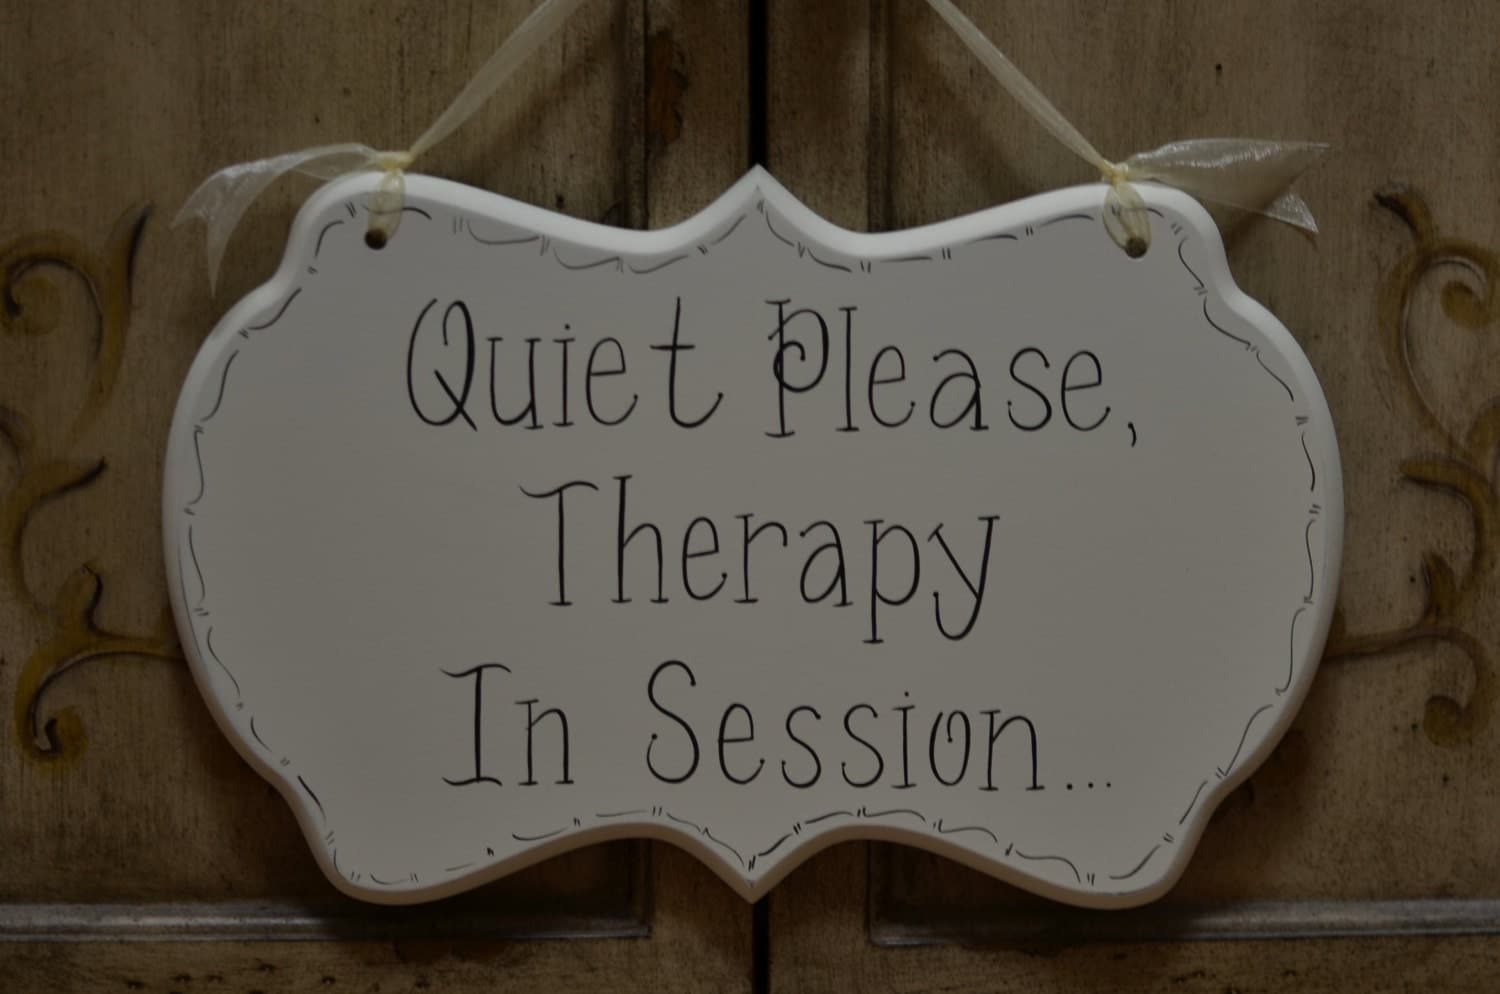 therapy-in-session-sign-hand-painted-wooden-cottage-chic